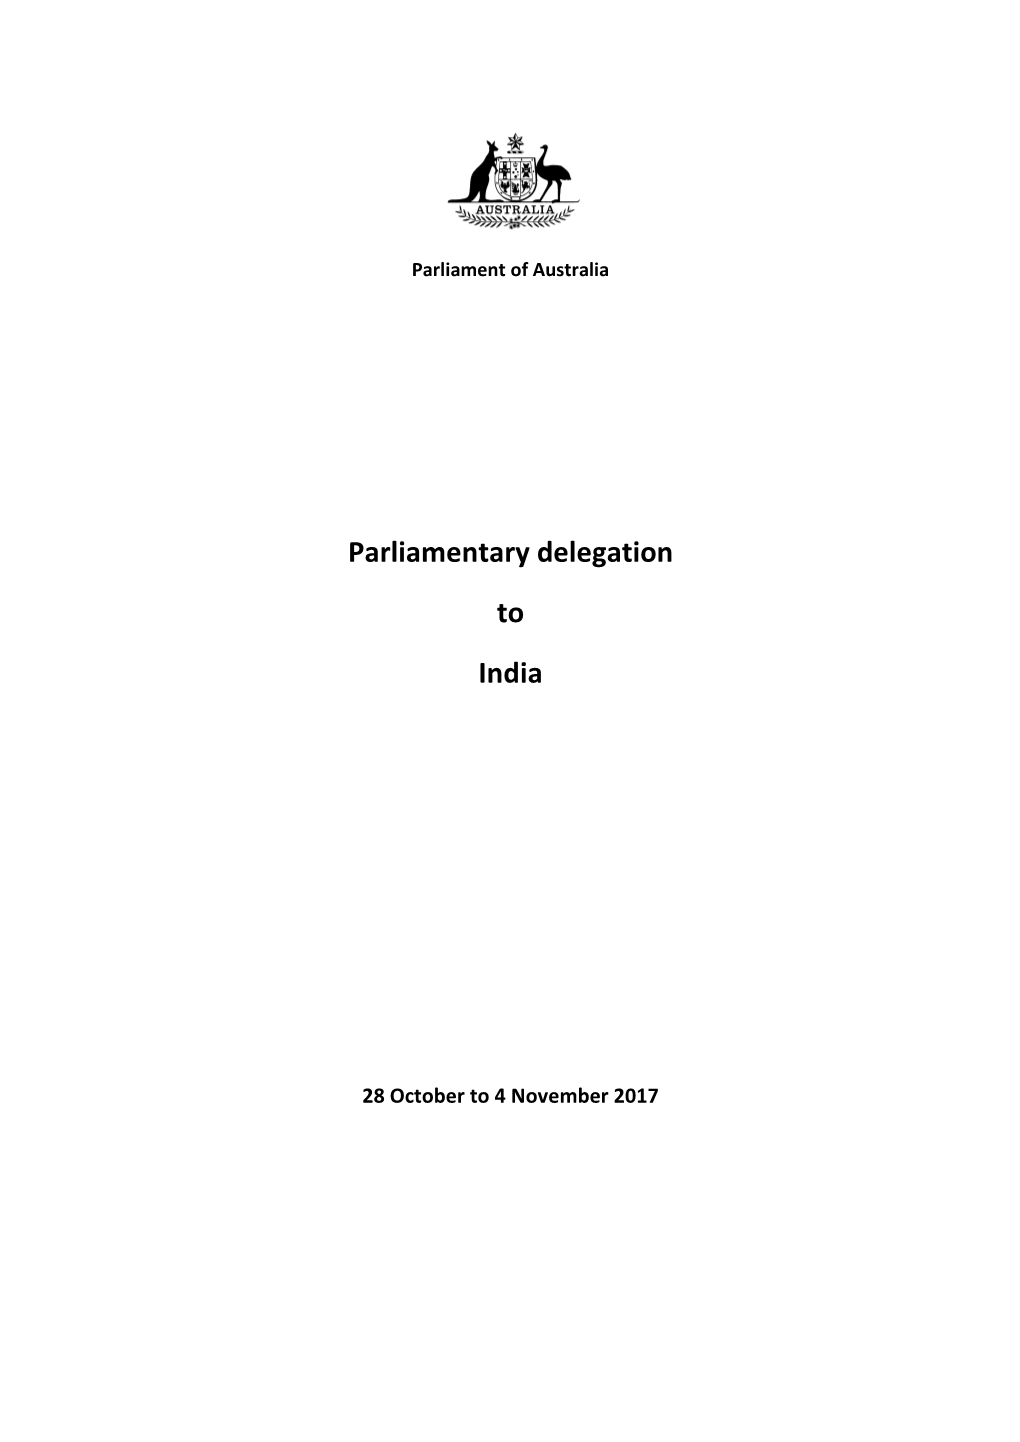 Parliamentary Delegation to India